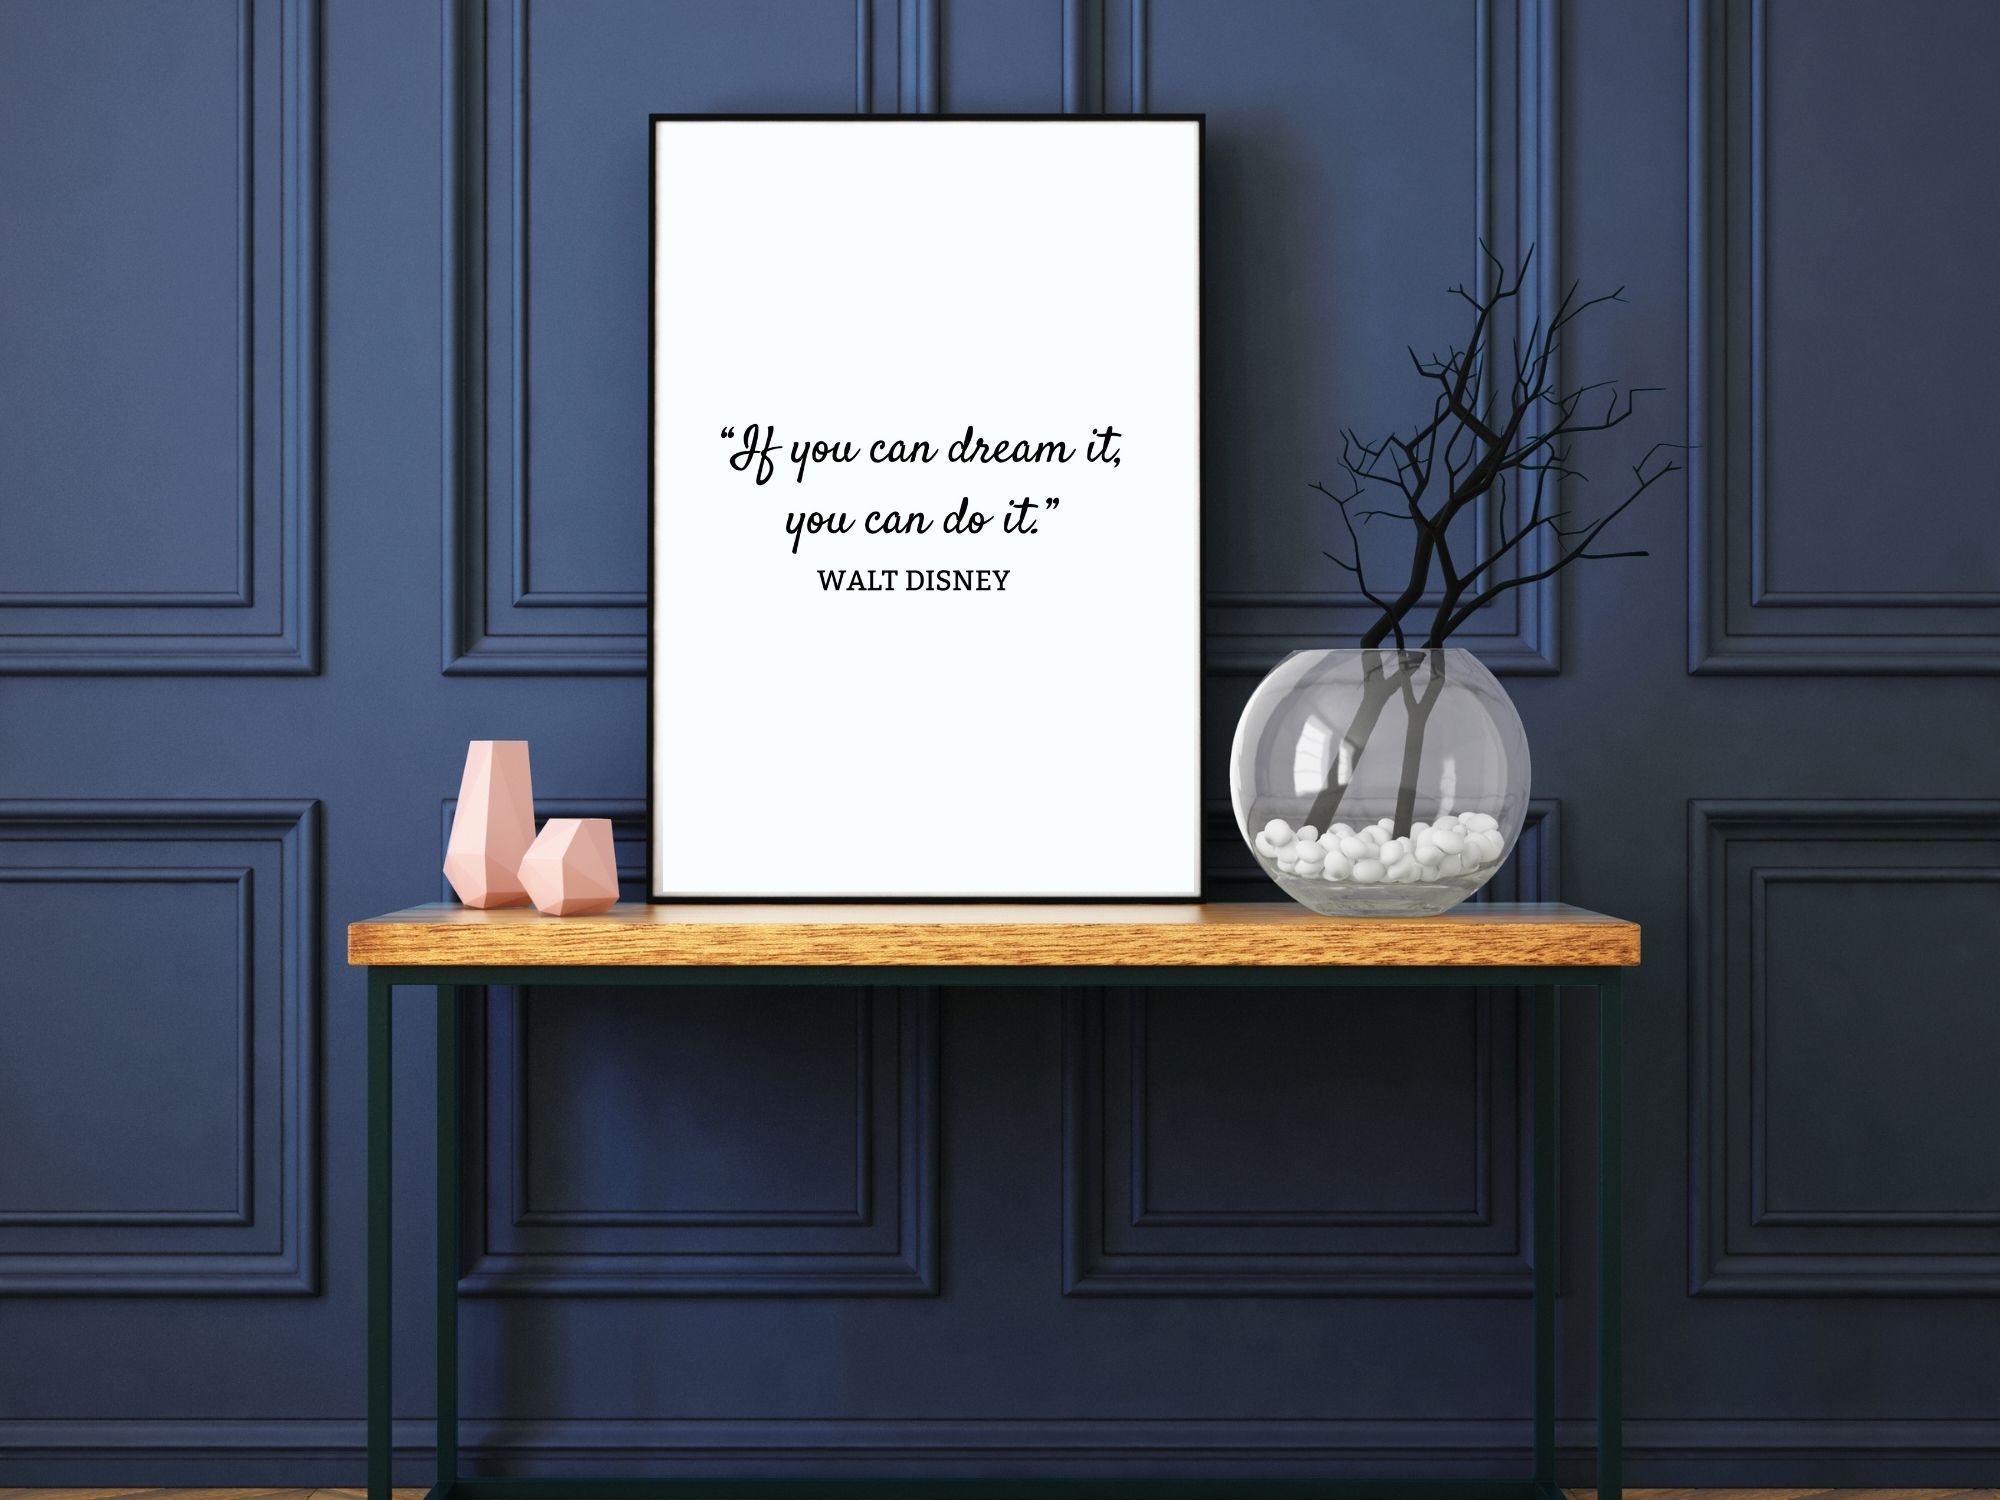 In This House We Do Disney Quote Text Wall Poster Print Walt